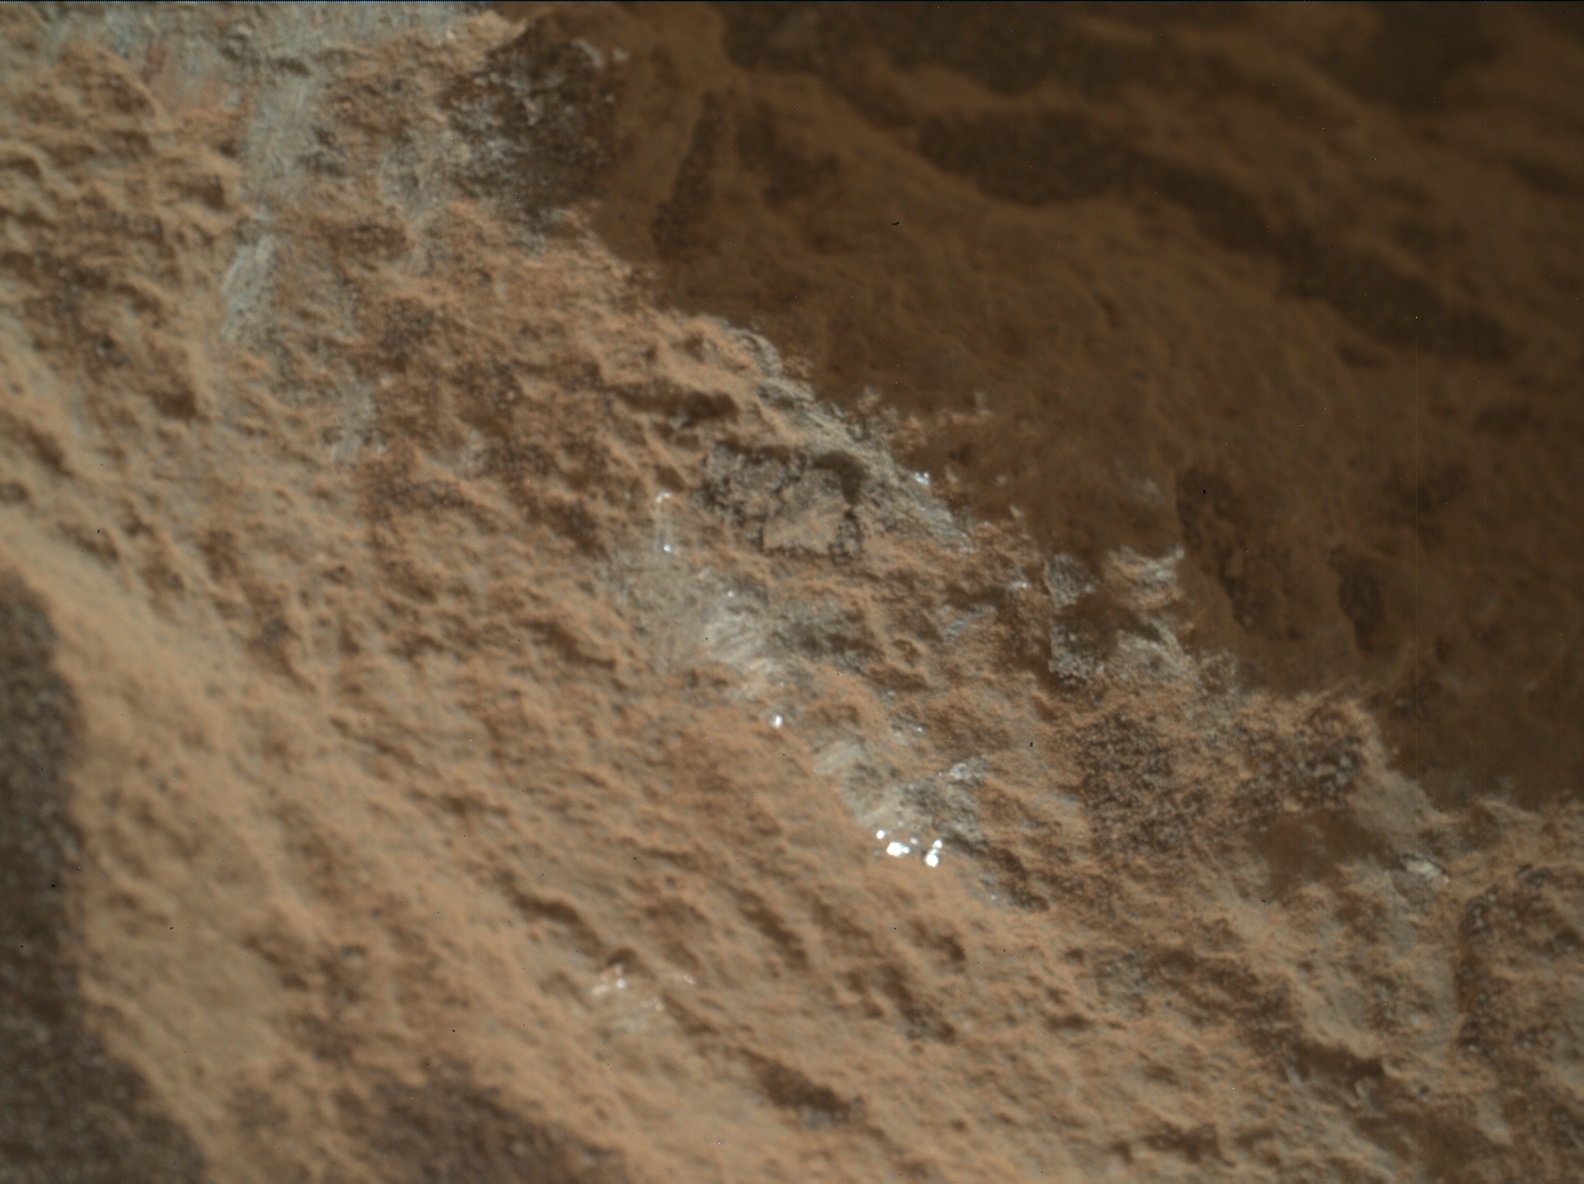 Nasa's Mars rover Curiosity acquired this image using its Mars Hand Lens Imager (MAHLI) on Sol 3439